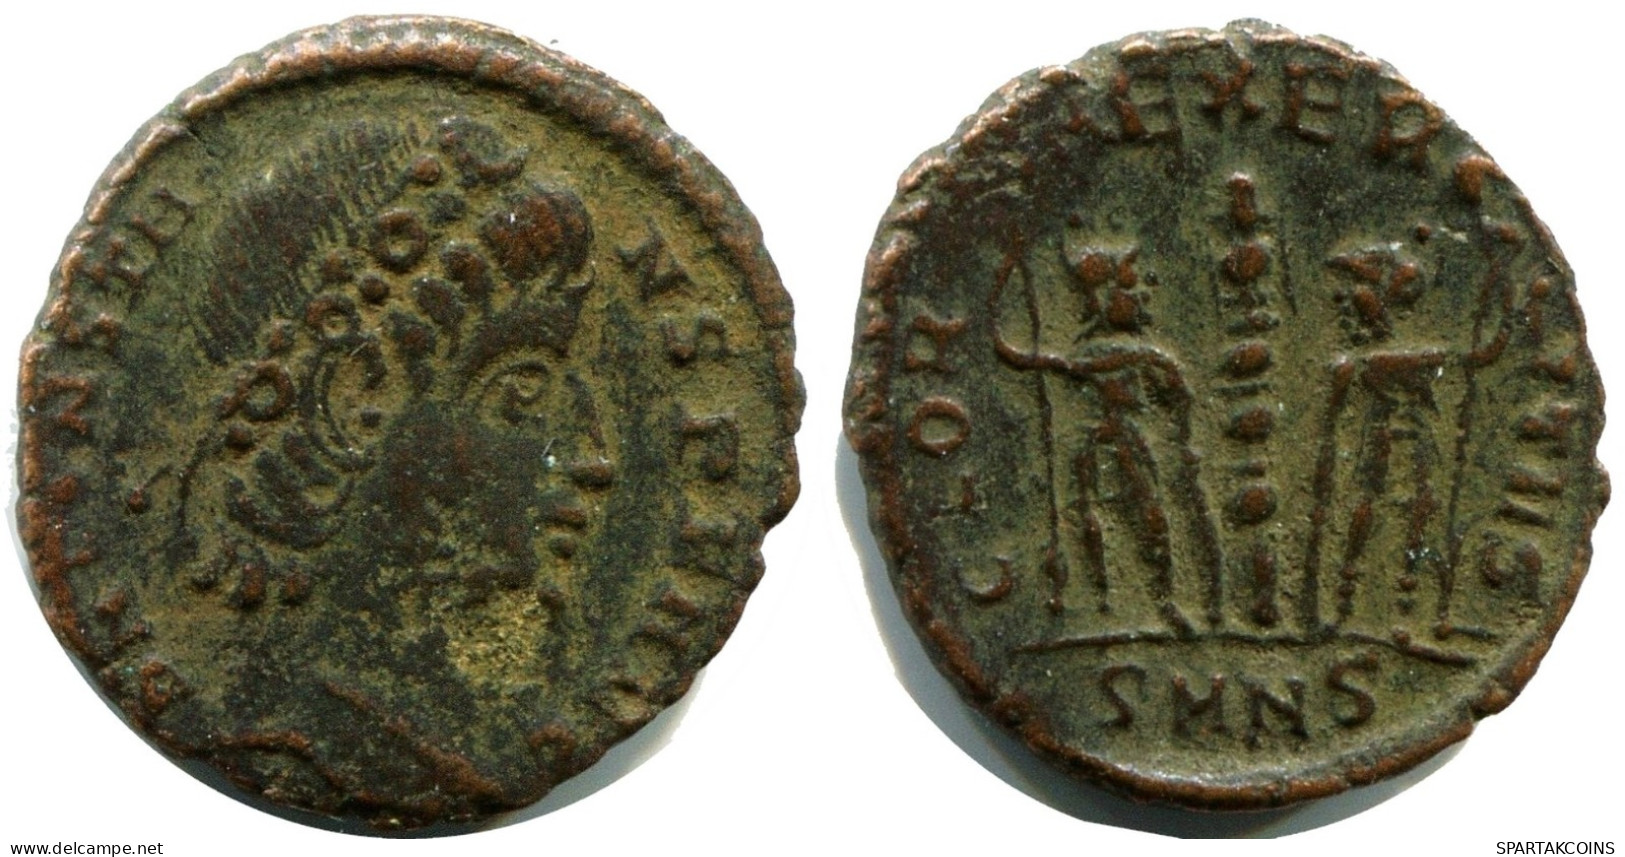 CONSTANS MINTED IN NICOMEDIA FROM THE ROYAL ONTARIO MUSEUM #ANC11775.14.E.A - El Impero Christiano (307 / 363)